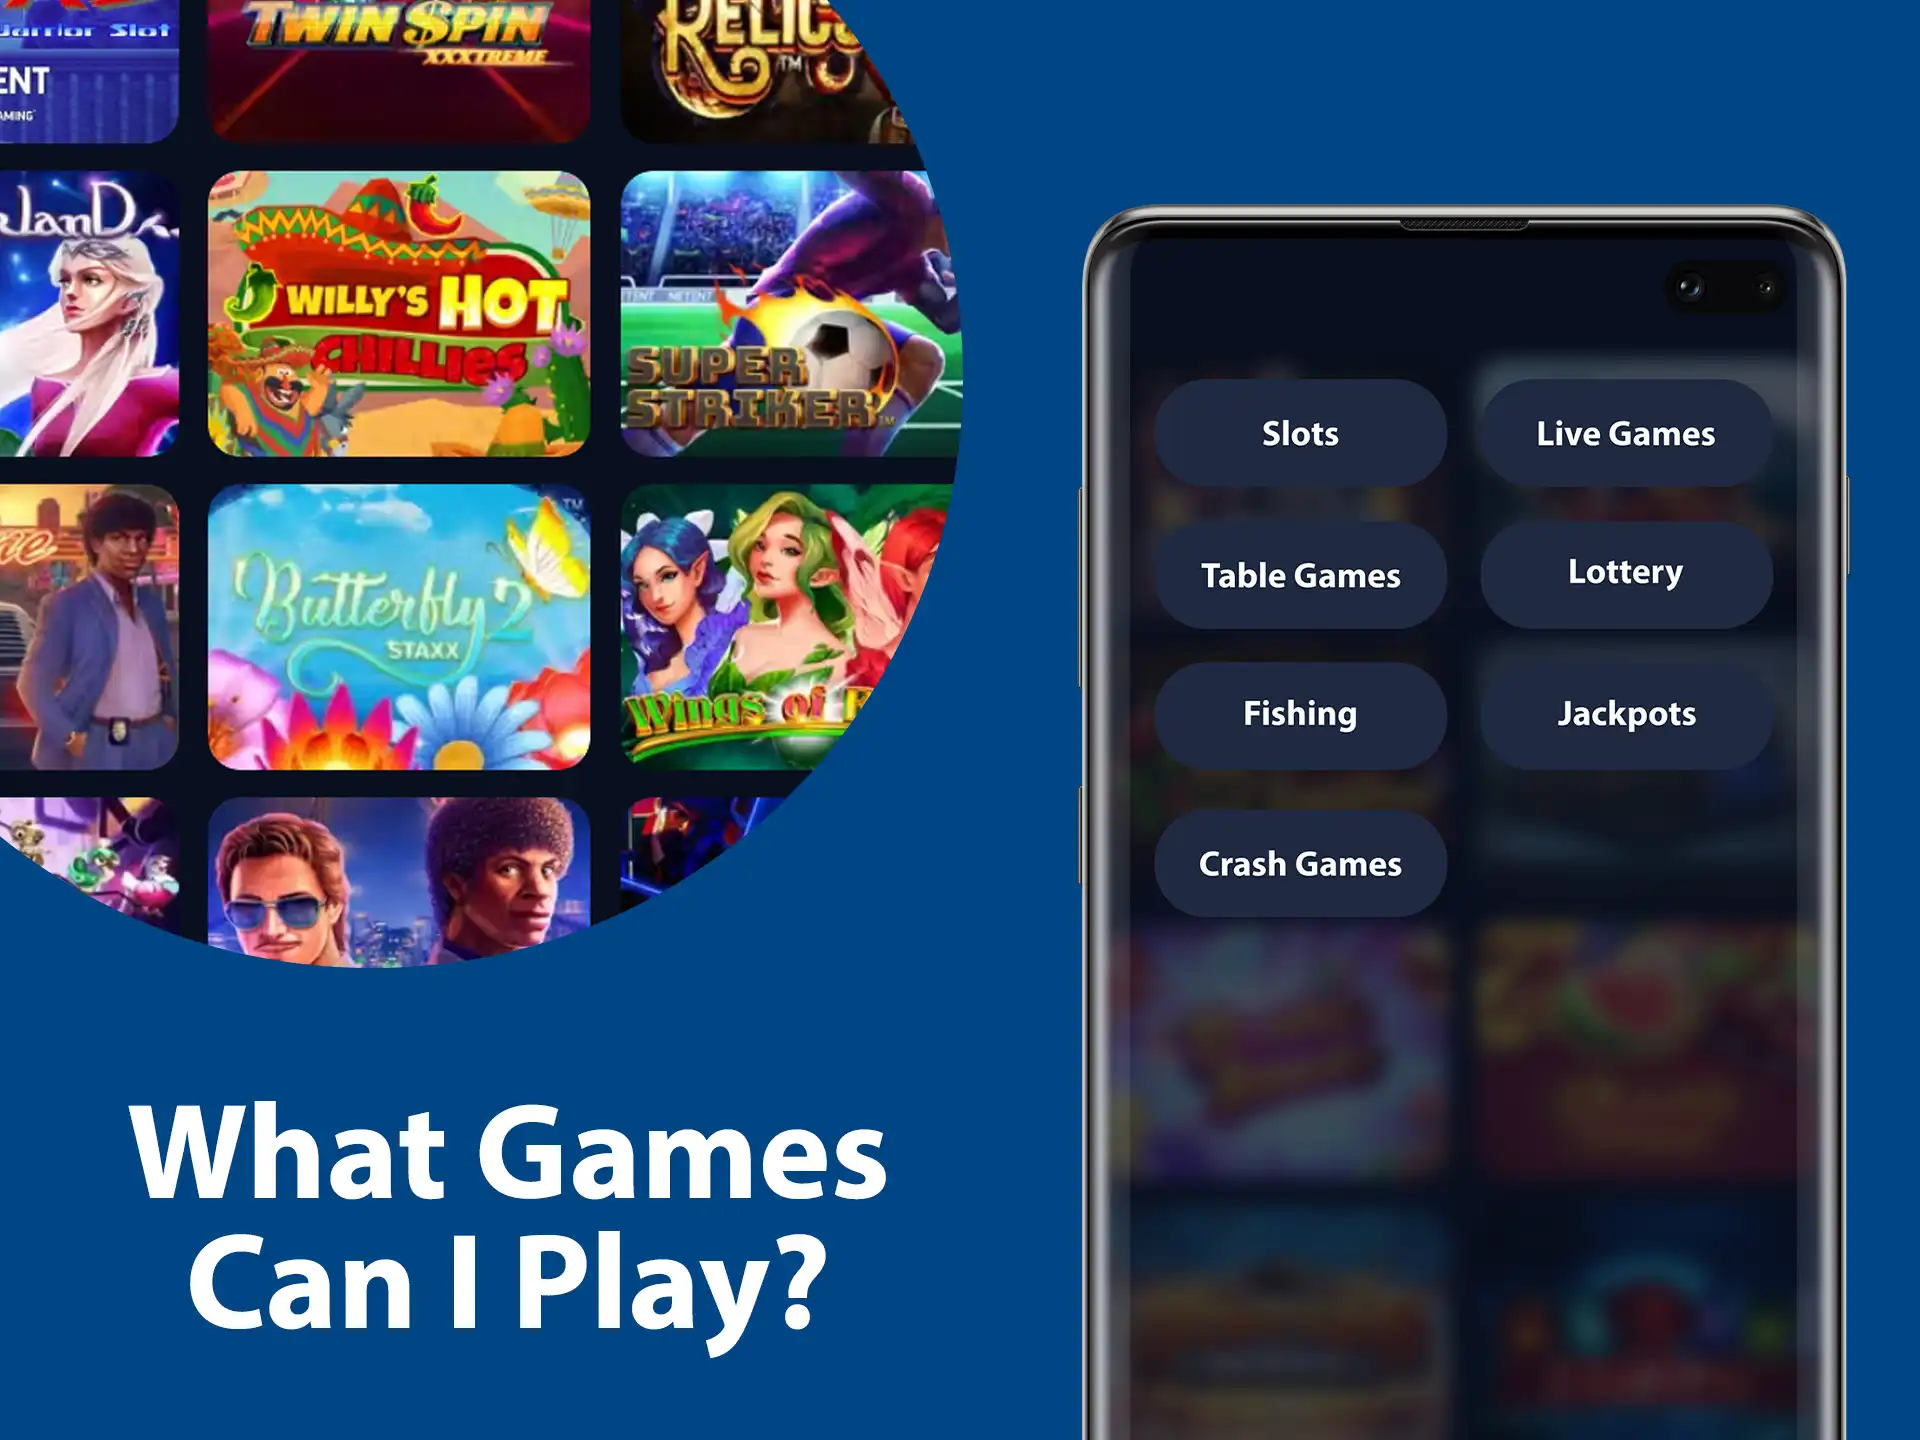 The category of games you can play is very large, ranging from slots to crash games.